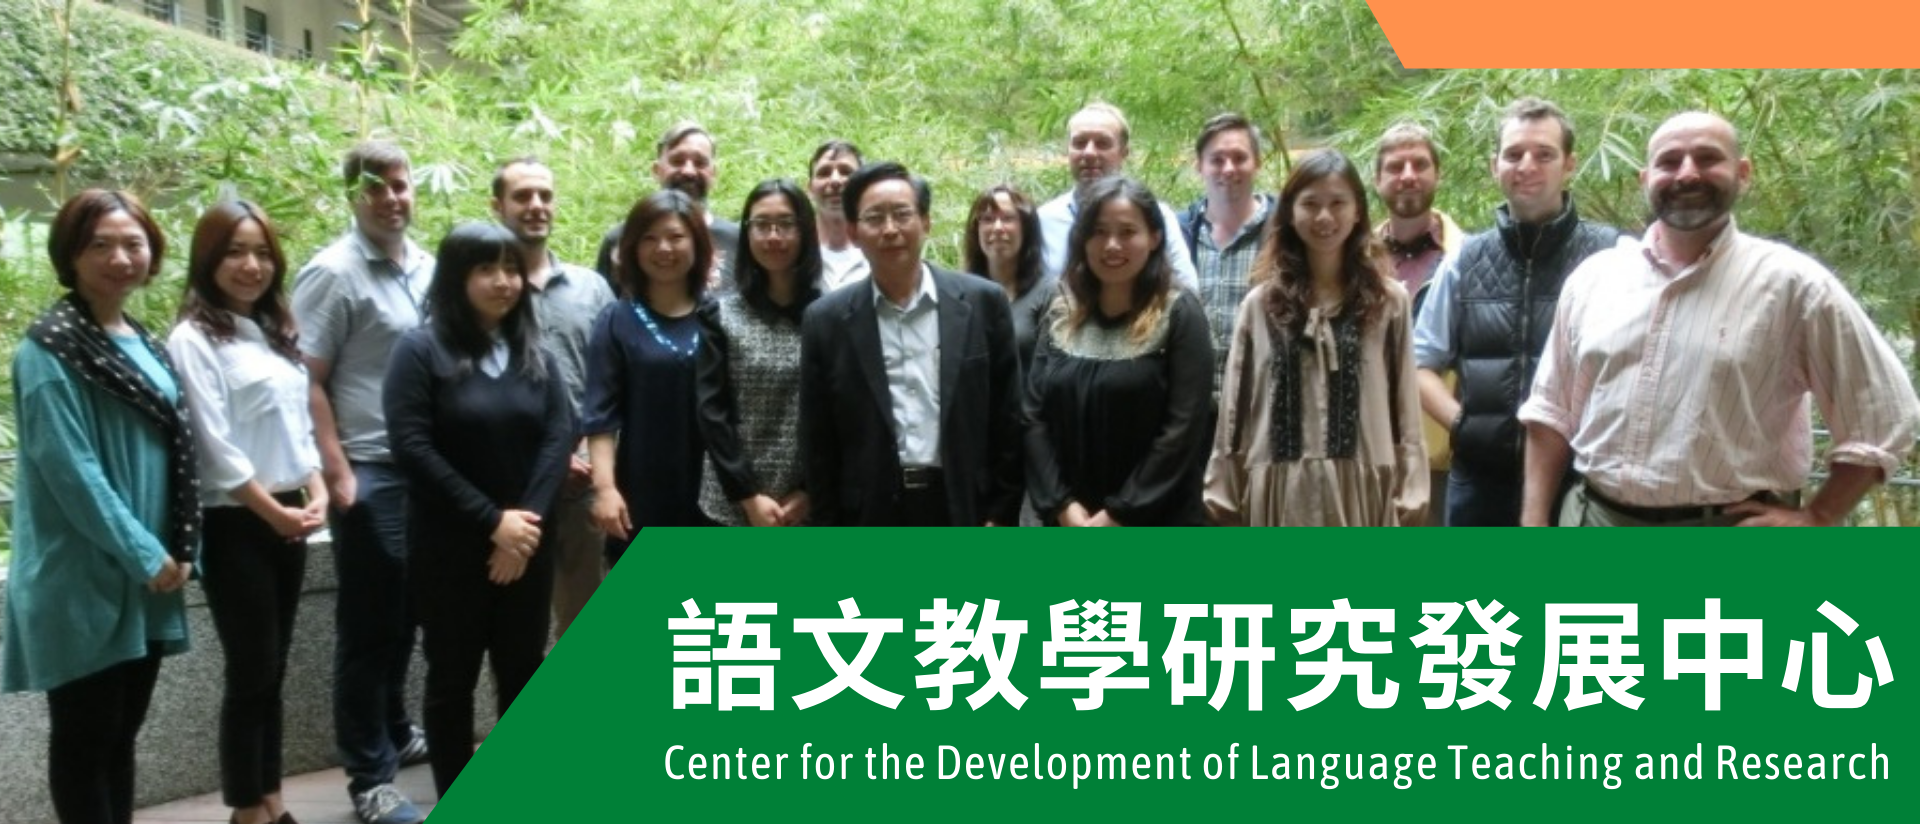 Center for the Development of Language Teaching and Research